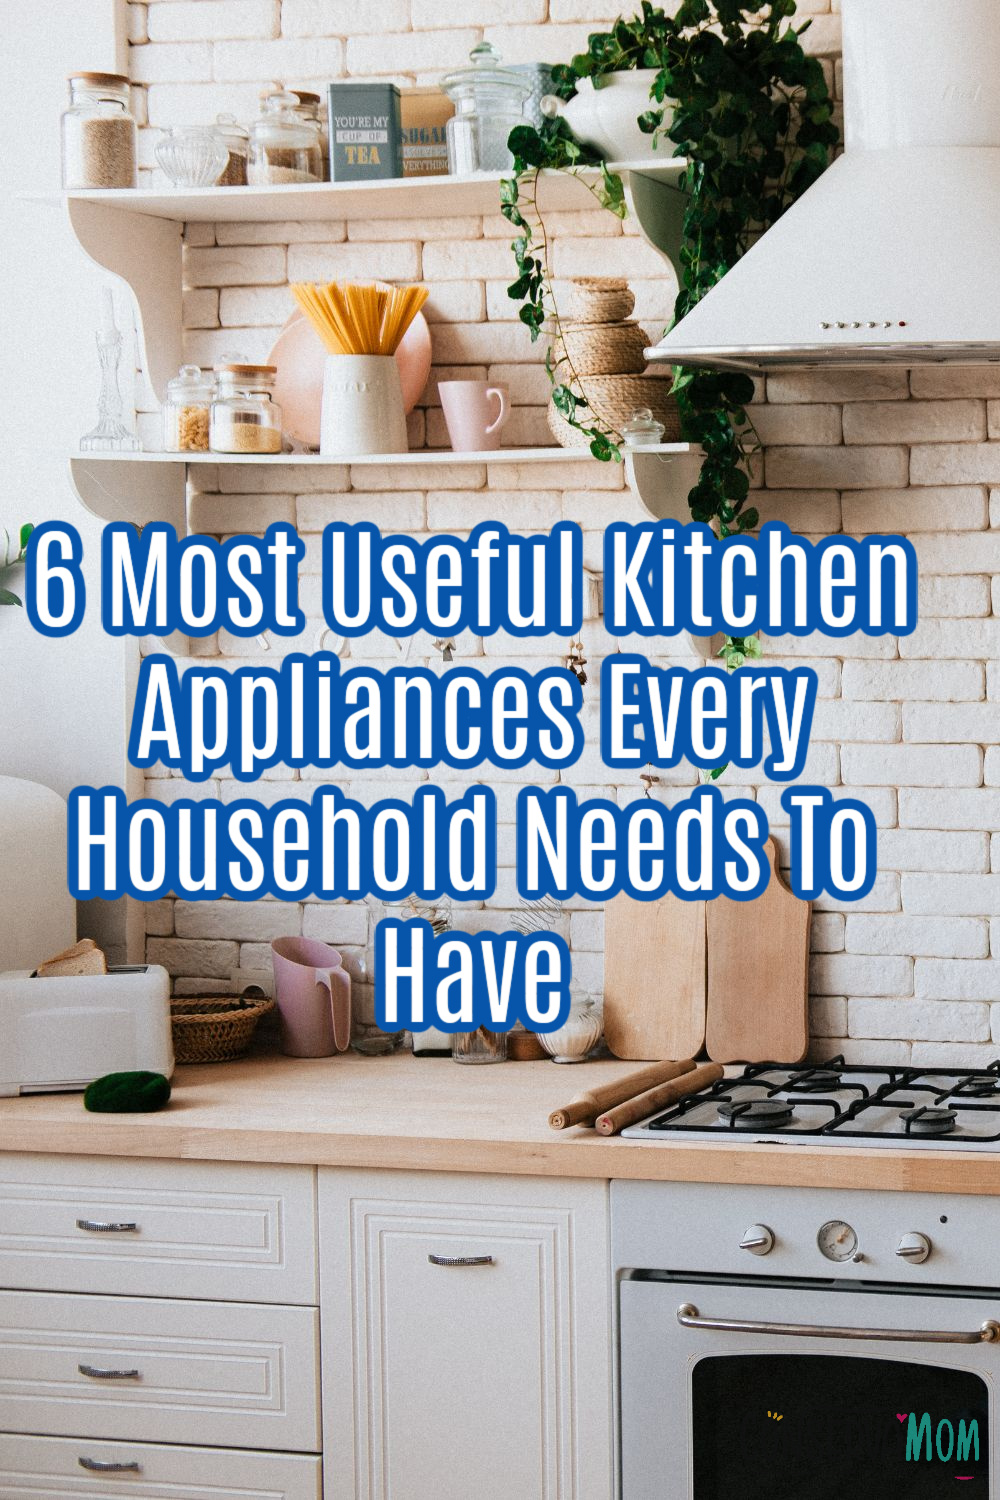 6 Most Useful Kitchen Appliances Every Household Needs To Have 